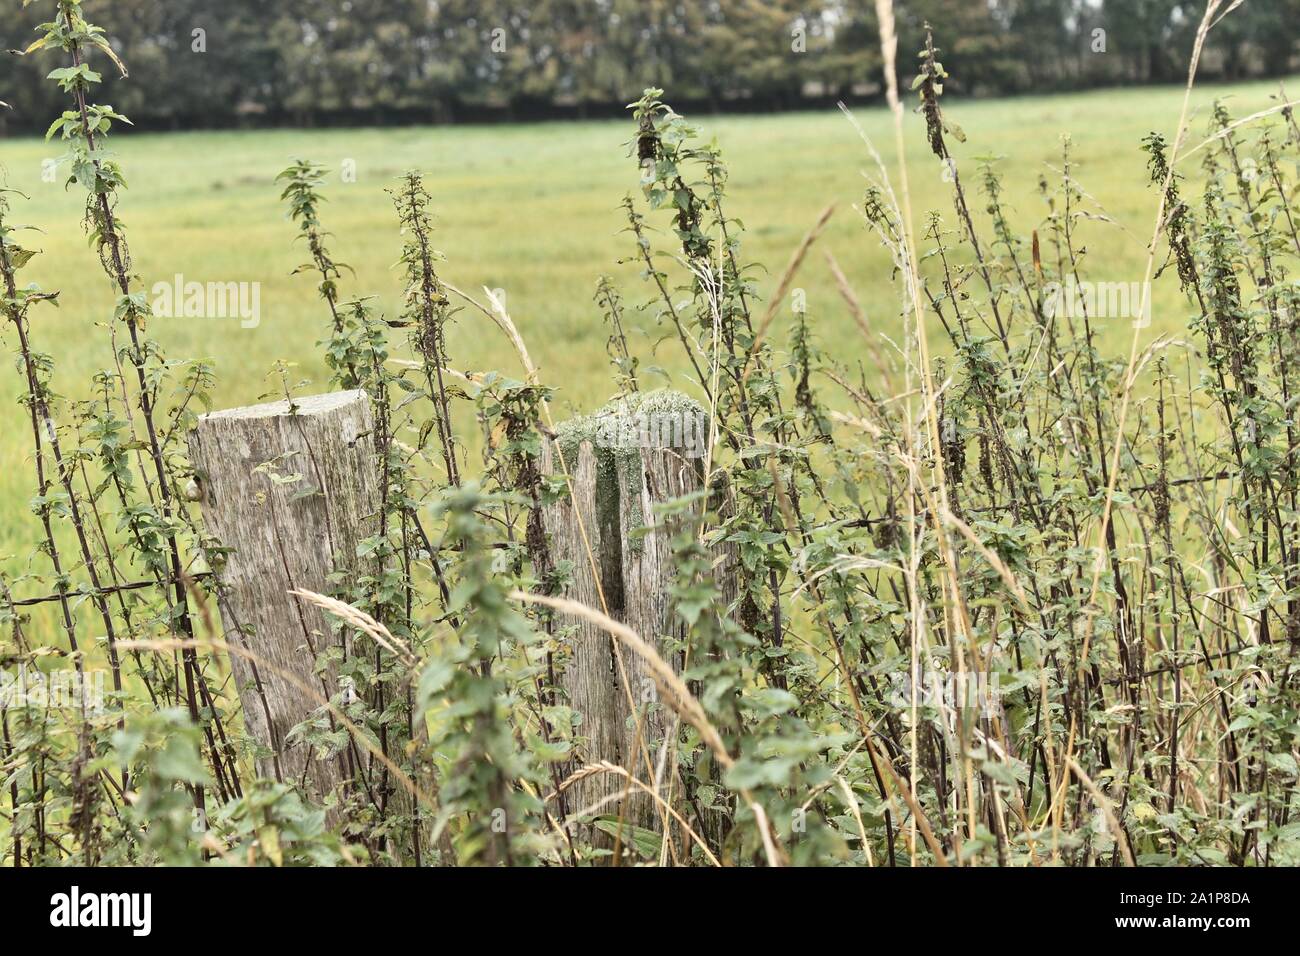 Details of an old fence with high grown stinging nettles Stock Photo